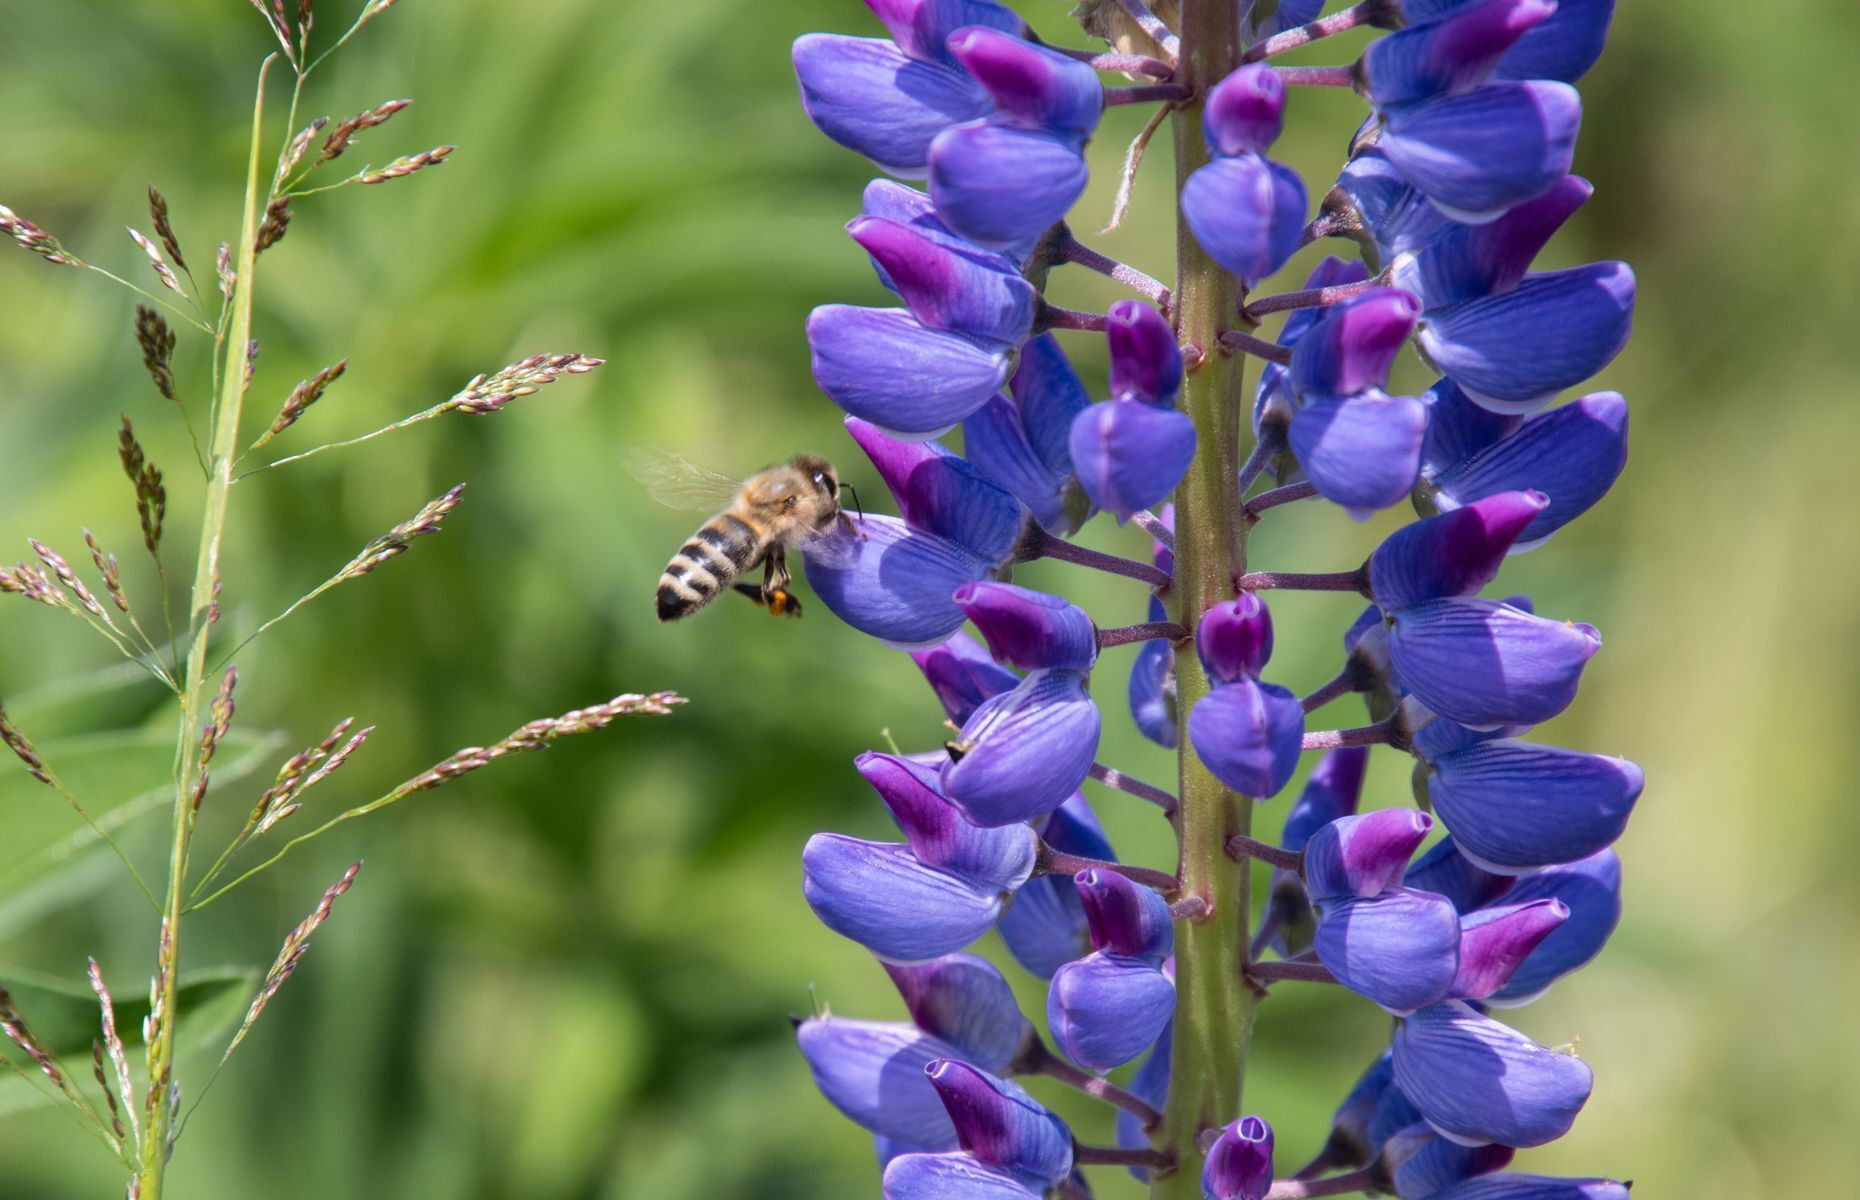 This includes plants that produce flowers with enough <a href="https://www.usgs.gov/faqs/do-bees-feed-both-nectar-and-pollen" rel="noreferrer noopener">nectar and pollen</a> as well as proper foraging <a href="https://www.fs.fed.us/wildflowers/pollinators/Plant_Strategies/visualcues.shtml" rel="noreferrer noopener">morphology</a> to ensure bee subsistence. While the sugar in nectar provides bees with energy (and the ingredients for making honey), pollen provides proteins, lipids, vitamins, and minerals. Find examples of nectar-producing plants <a href="https://www.bhg.com/gardening/design/nature-lovers/nectar-plants-for-pollinators/" rel="noreferrer noopener">here</a>.